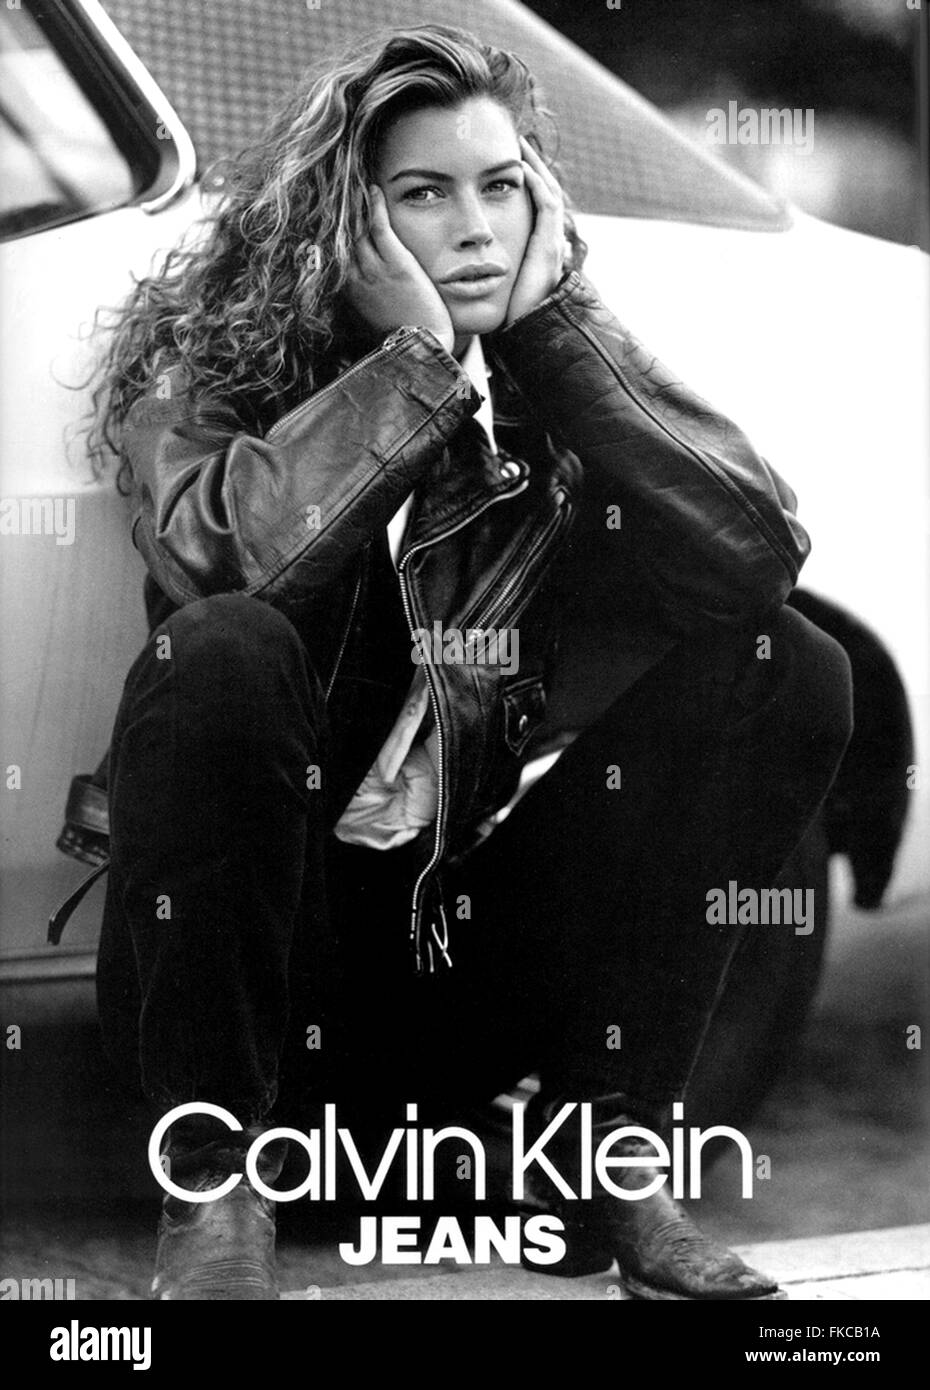 Calvin klein jeans Black and White Stock Photos & Images - Alamy